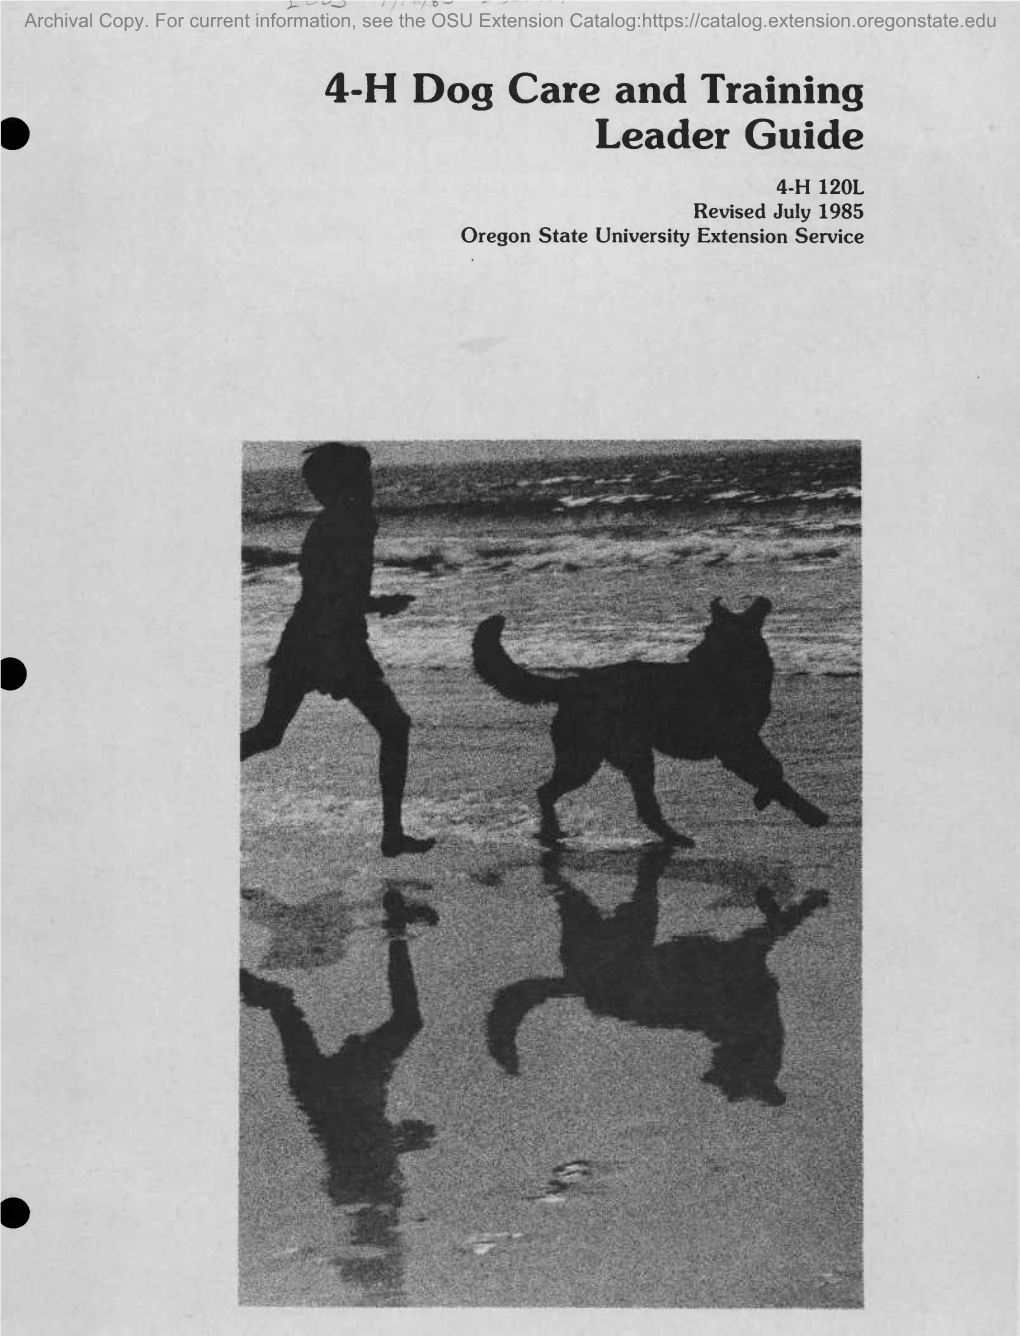 4-H Dog Care and Training Leader Guide 4-H 120L Revised July 1985 Oregon State University Extension Service Archival Copy